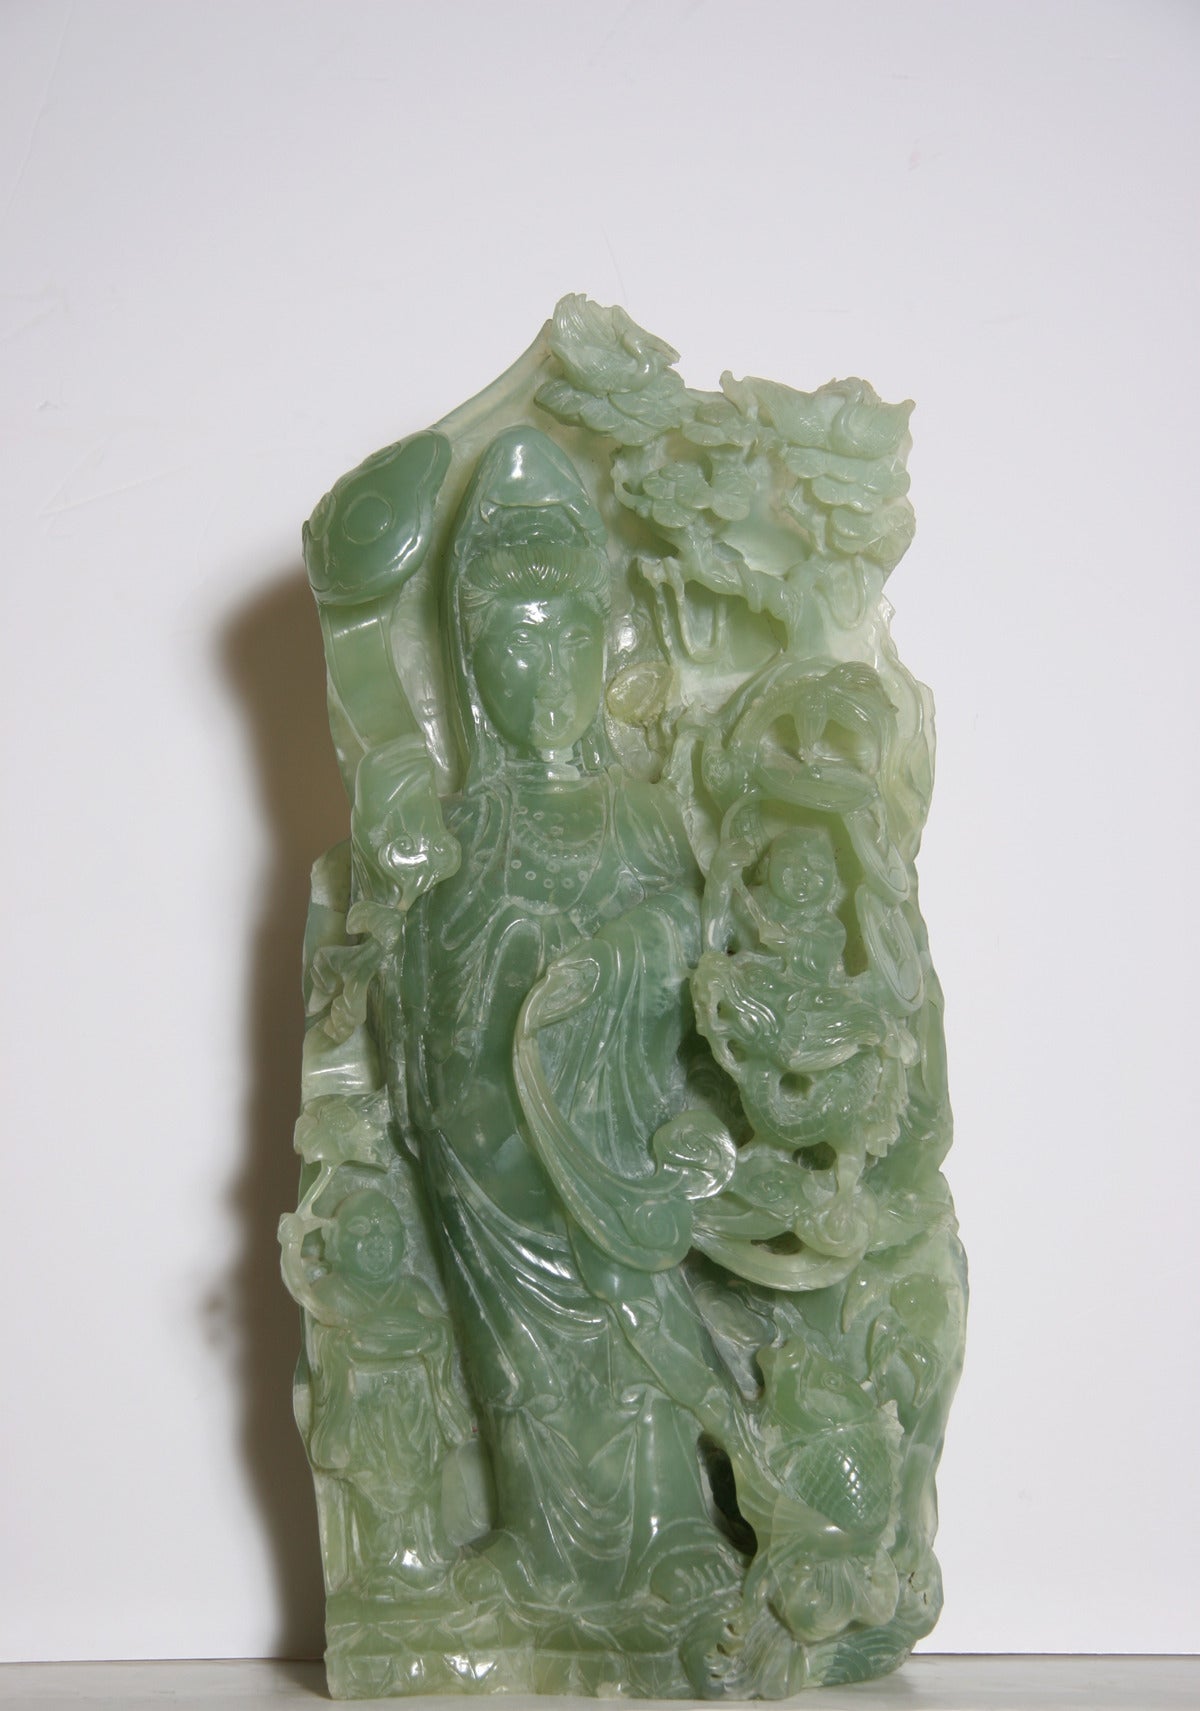 Woman and Two Children, Asian Carved Jade Sculpture